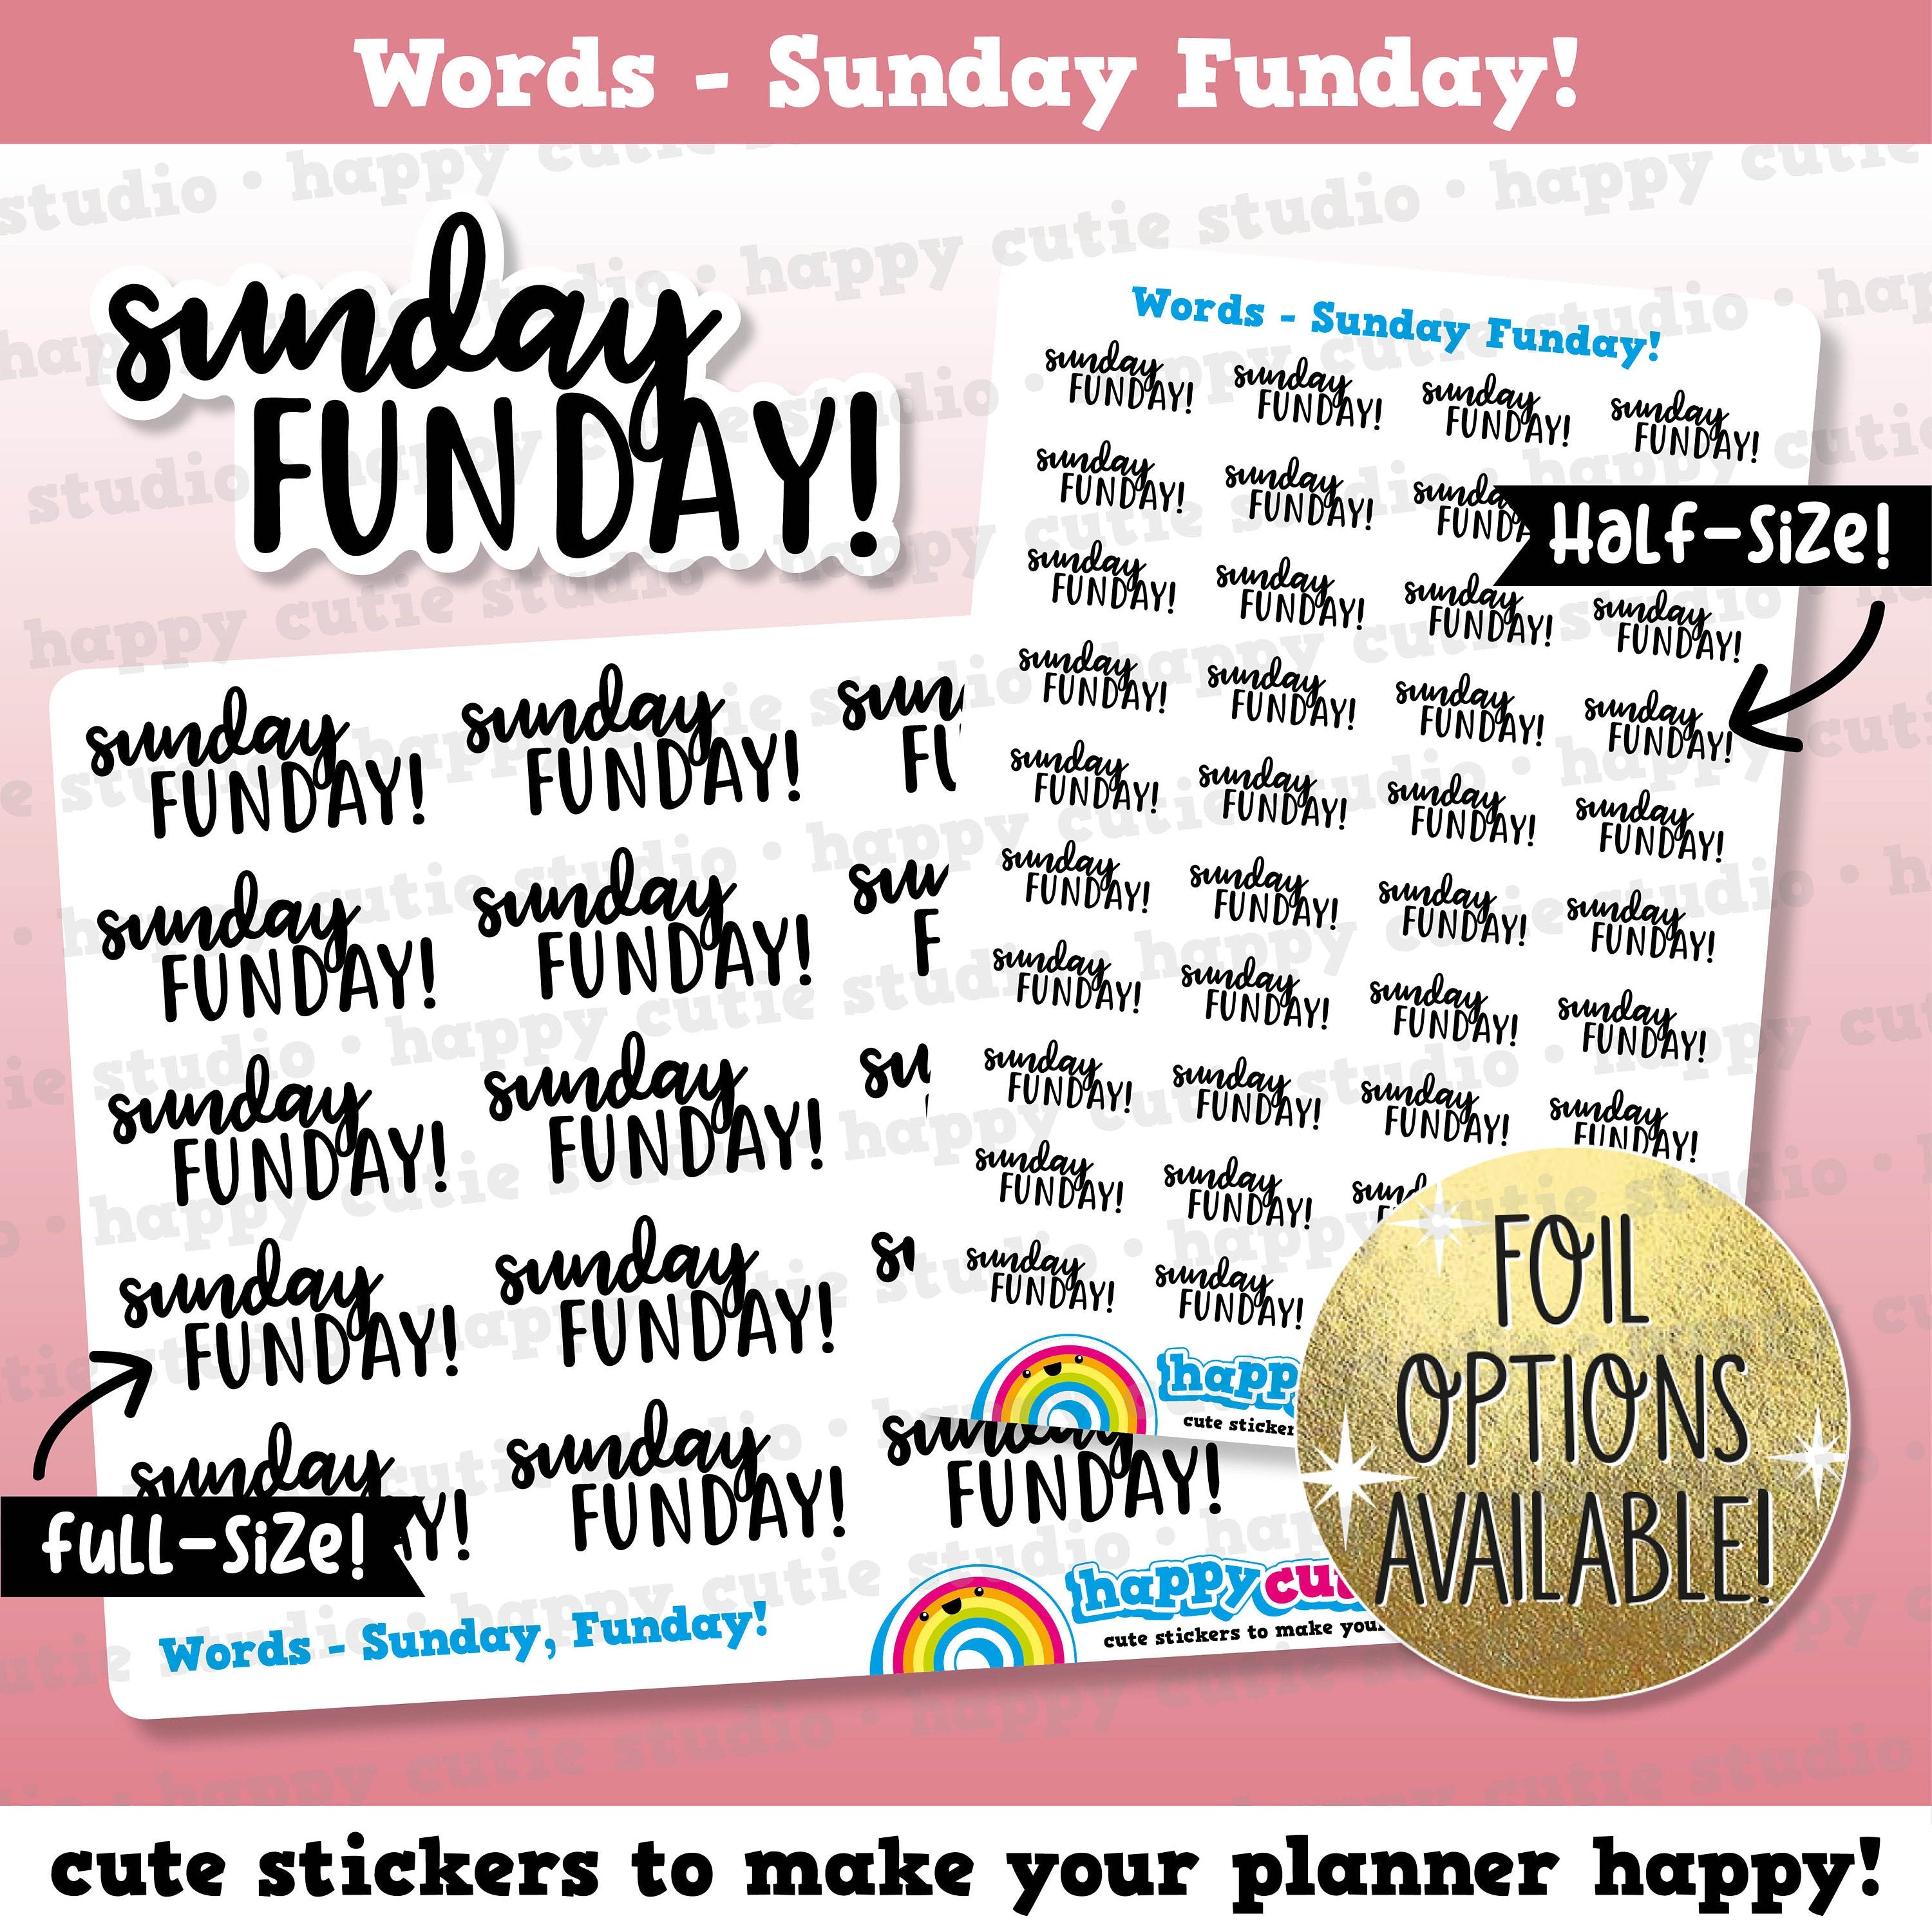 Sunday Funday Words/Functional/Foil Planner Stickers